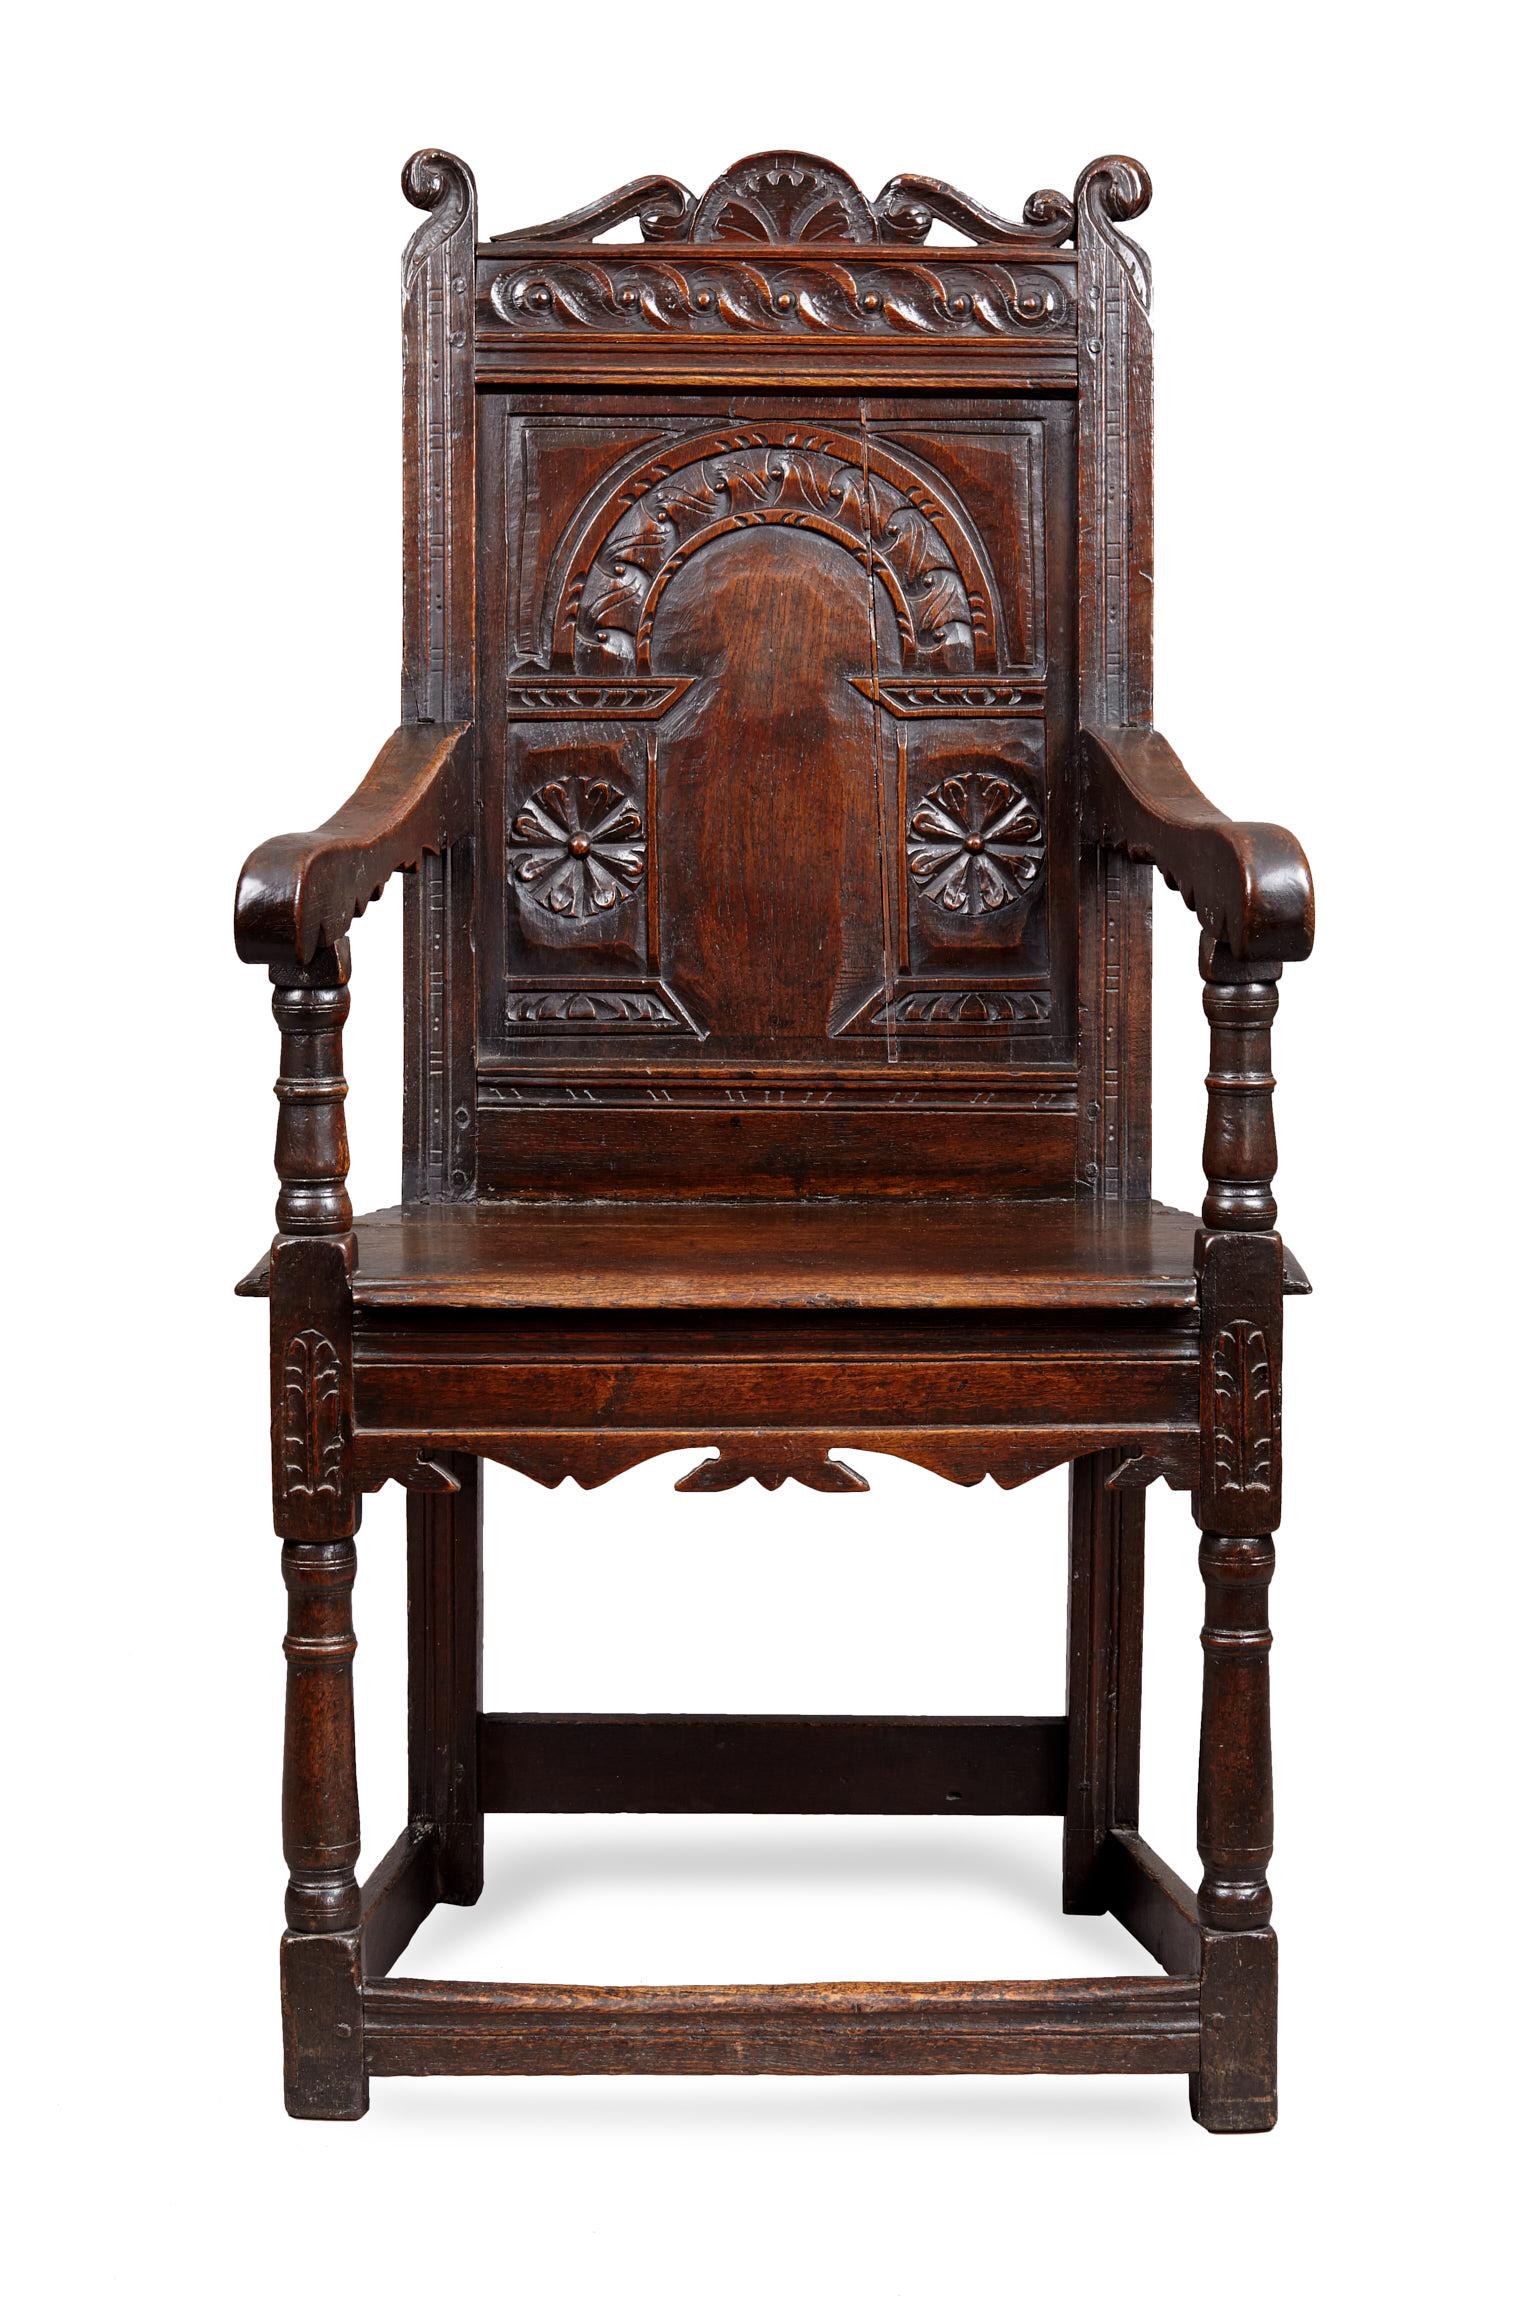 Charles I oak armchair, Gloucestershire, circa 1630-1640

The perforated scroll carved cresting flanked by reverse scroll uprights above a guilloche carved top rail, with recess arcaded back panel and floral uprights flanked by bold silhouette